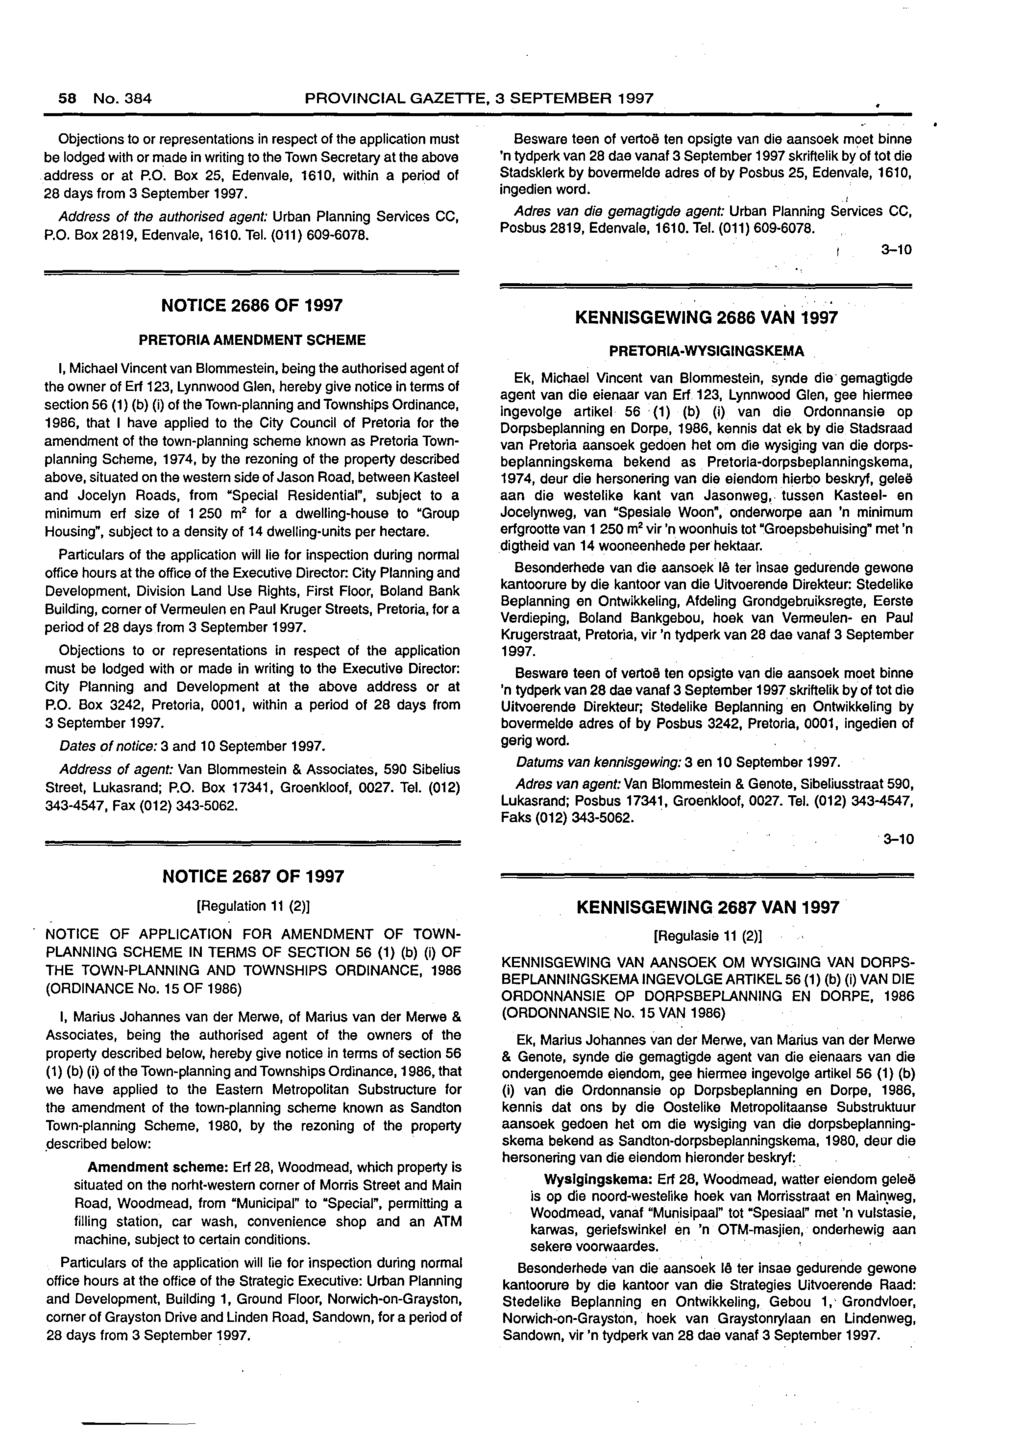 58 No. PROVINCIAL GAZETTE, 3 SEPTEMBER 1997 be lodged with or made in writing to the Town Secretary at the above address or at P.O. Box 25, Edenvale, 1610, within a period of 28 days from Address of the authorised agent: Urban Planning Services CC, P.